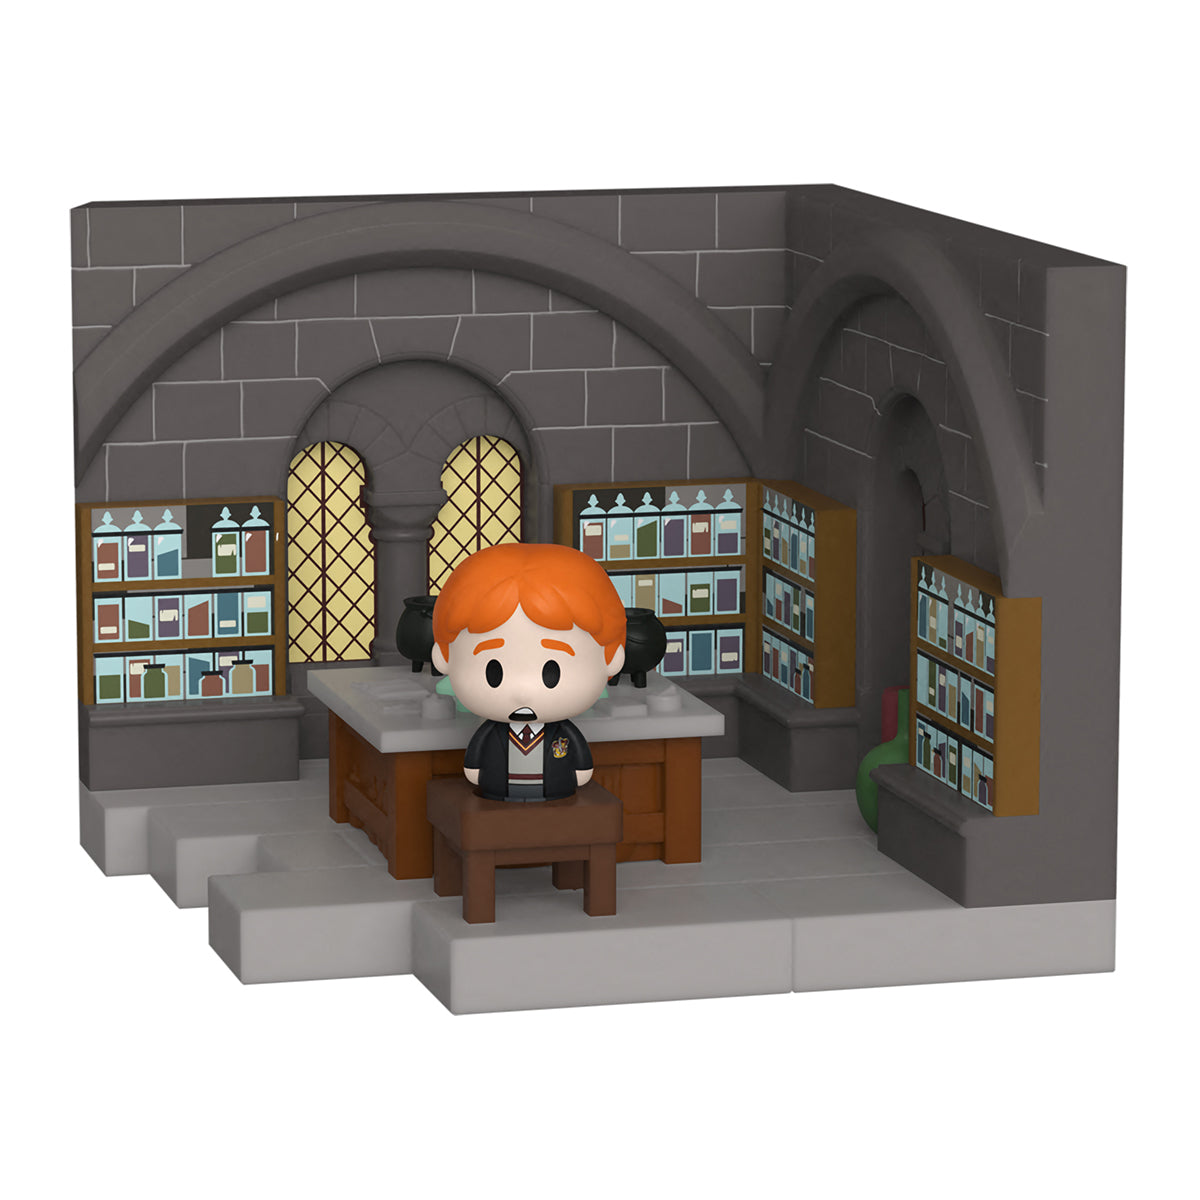 FUNKO MINI MOMENTS WIZARDING WORLD HARRY POTTER POTIONS CLASS RON WEASLEY